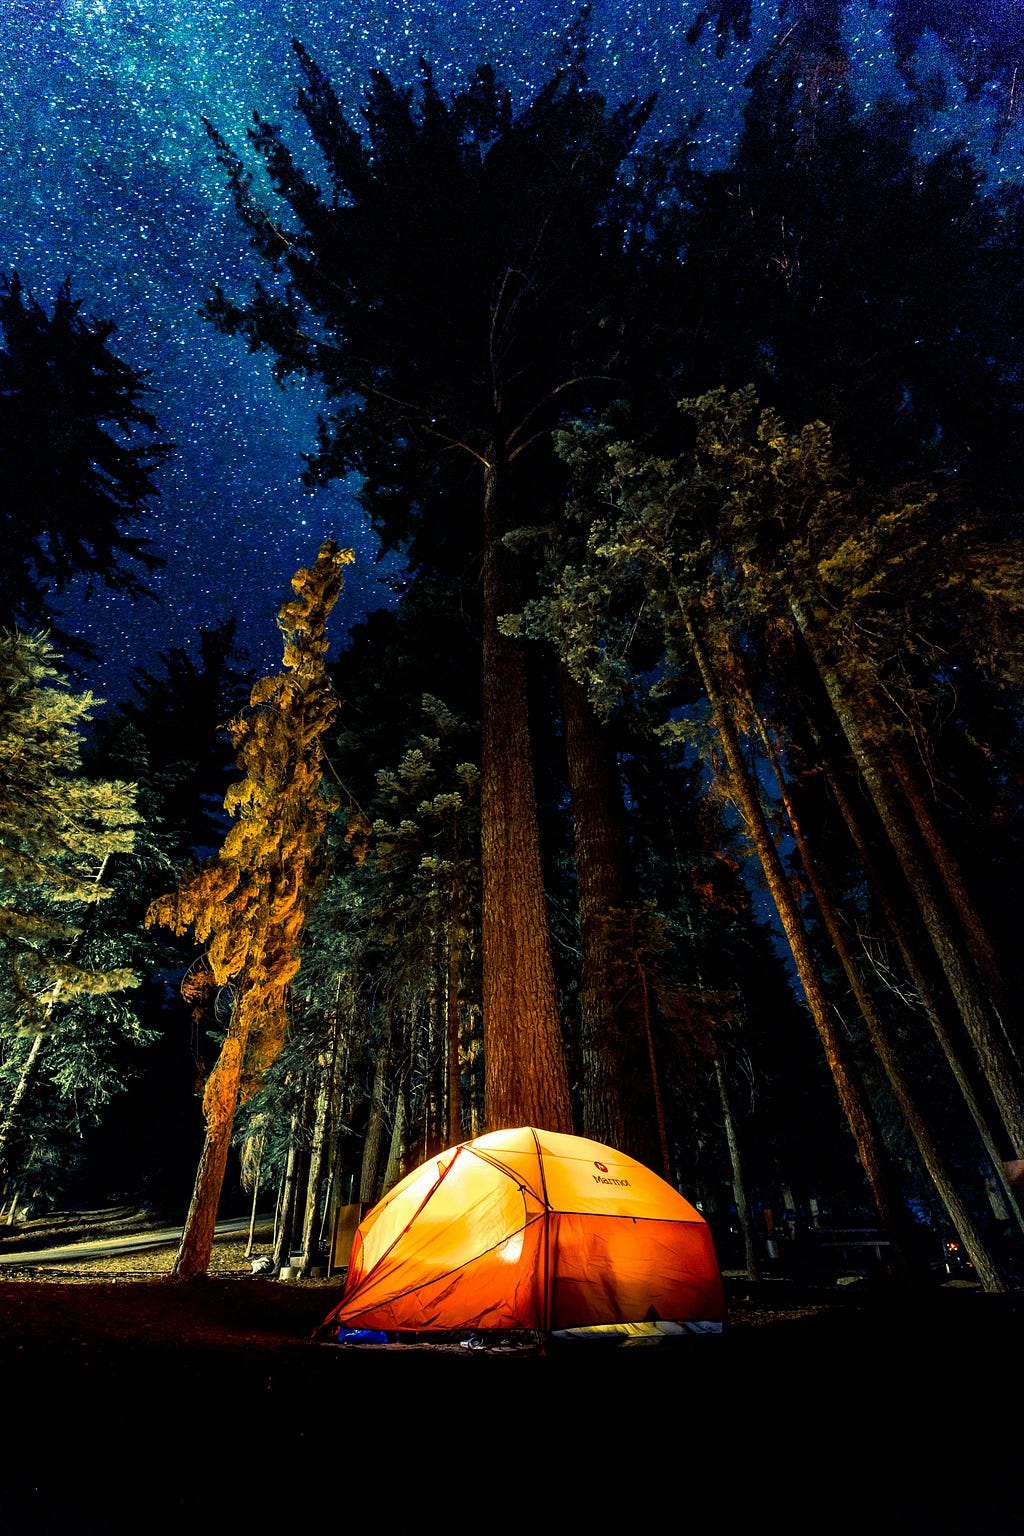 A tent beneath tall trees and the night sky with stars. Photo by Denys Nevozhai and Unsplash.